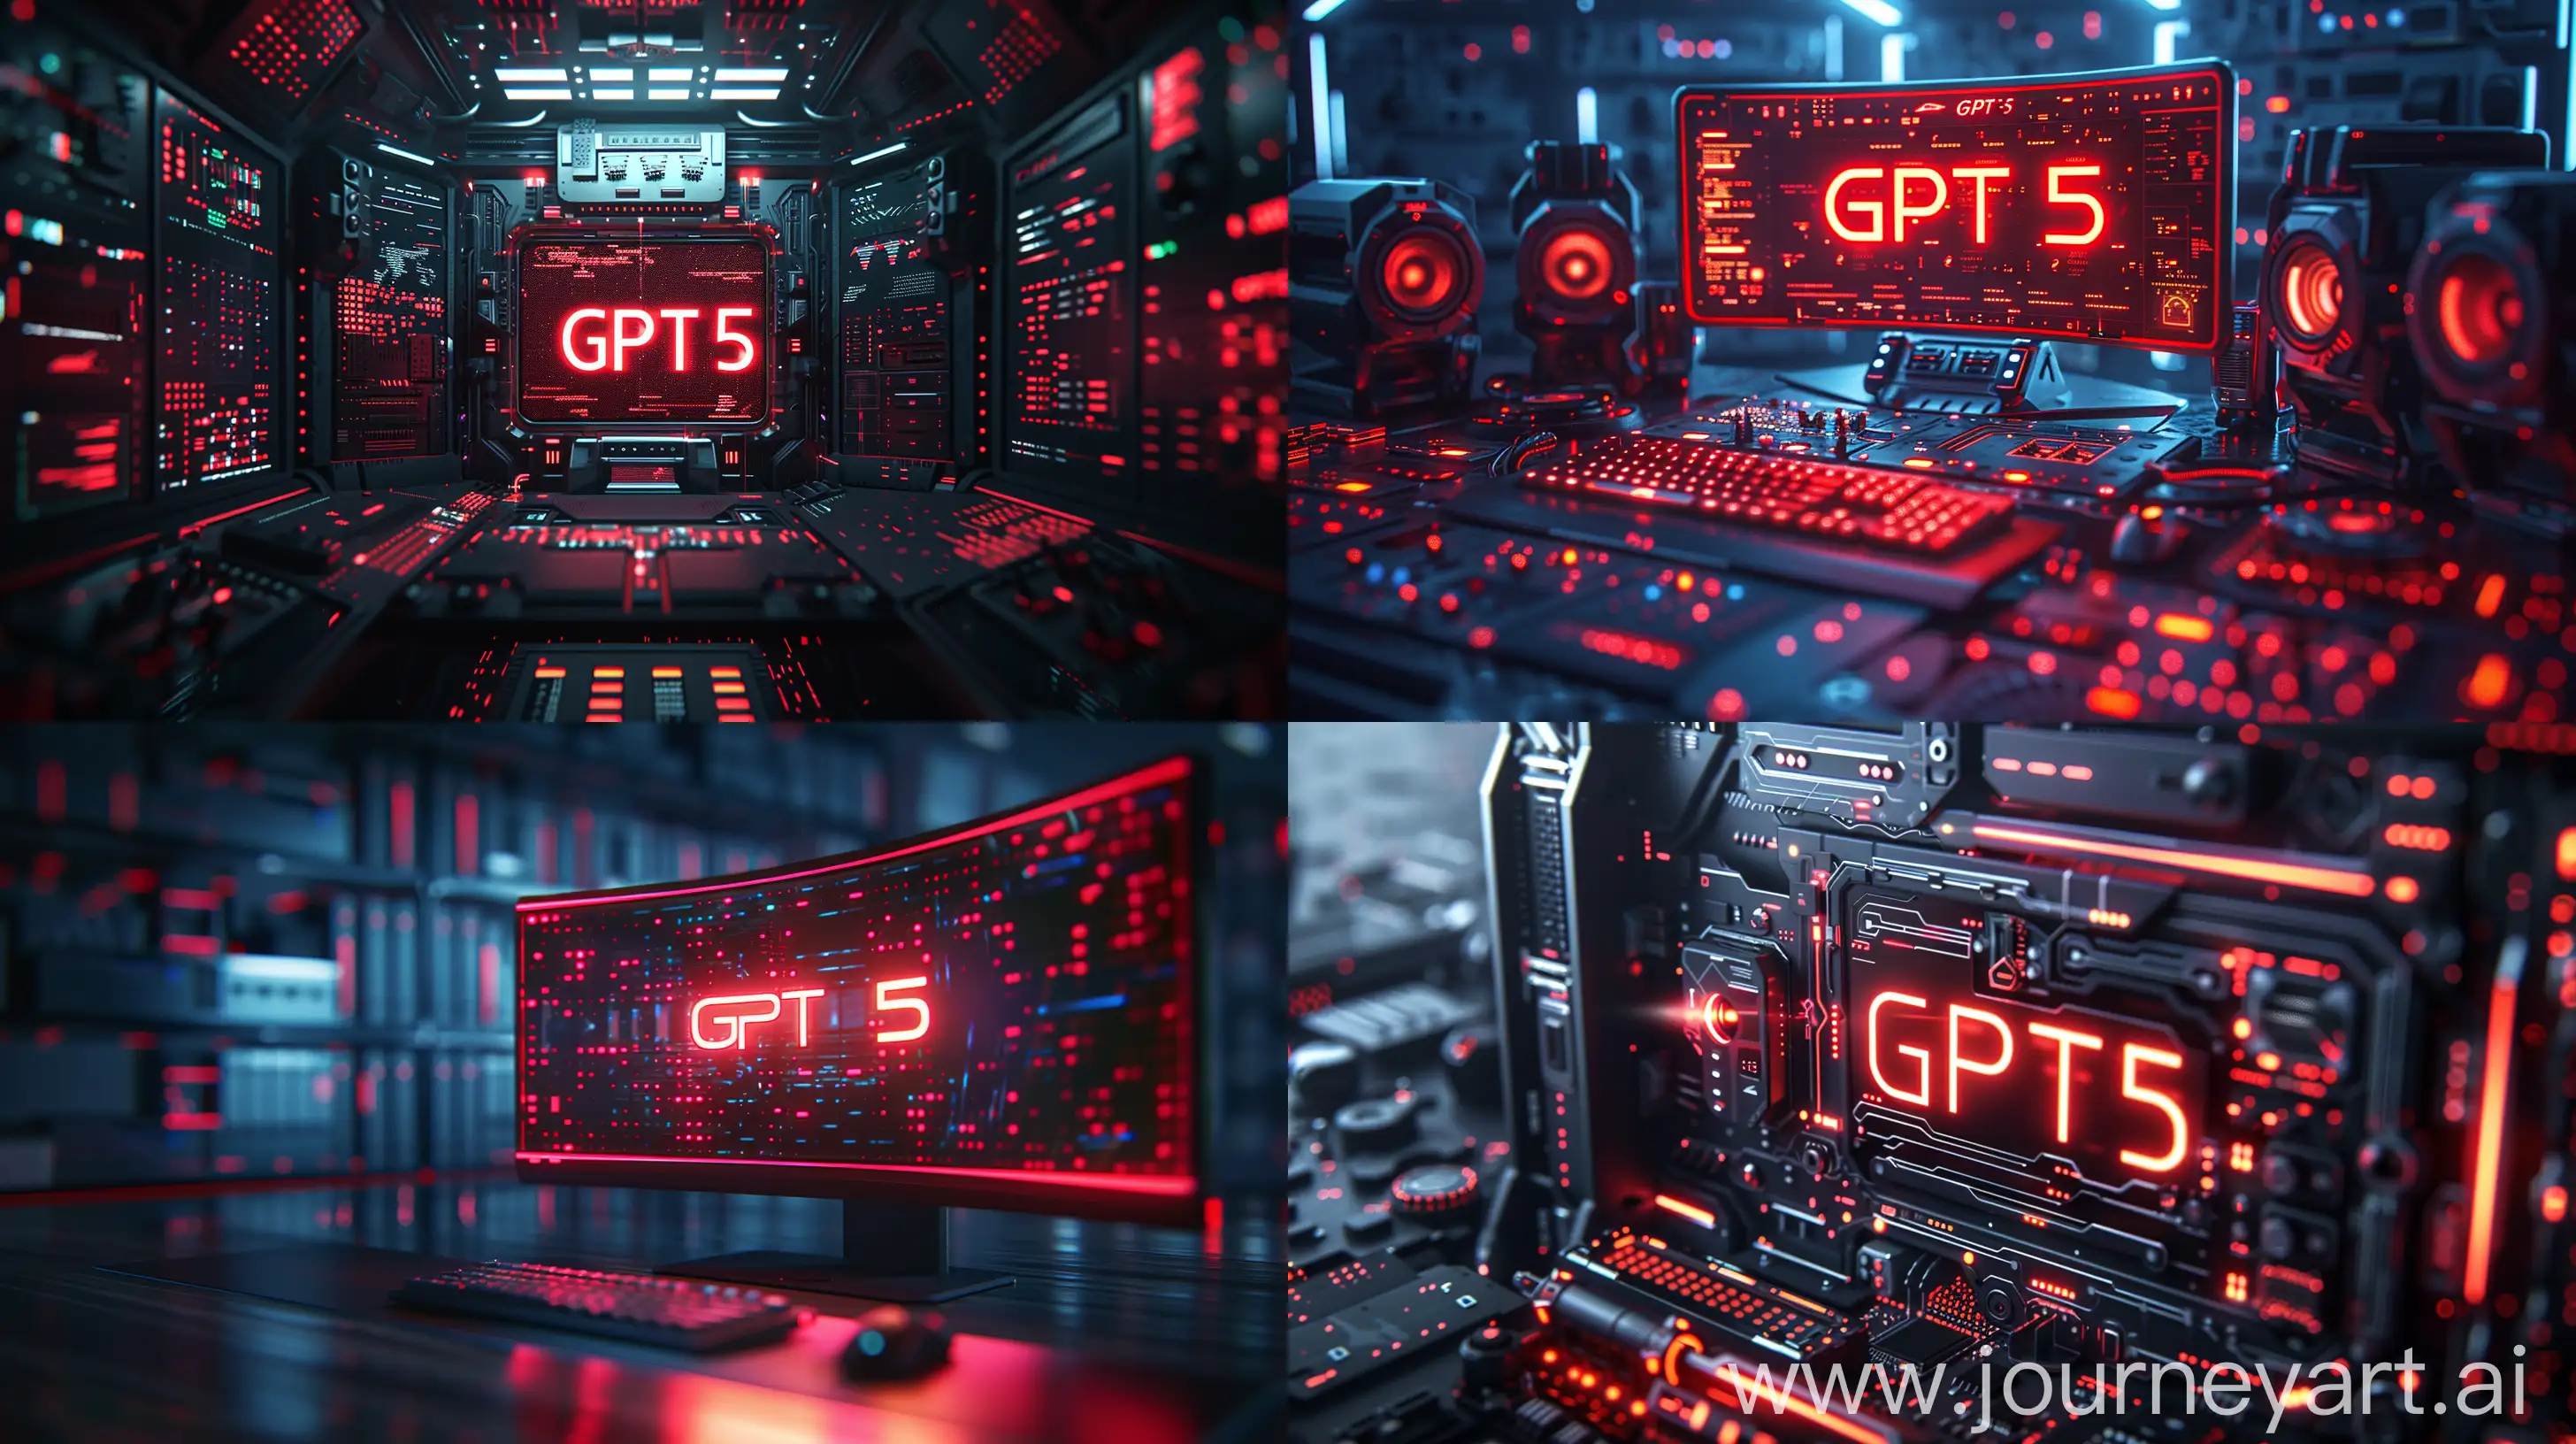 Futuristic-GPT5-Computer-Displaying-Red-GPT5-Text